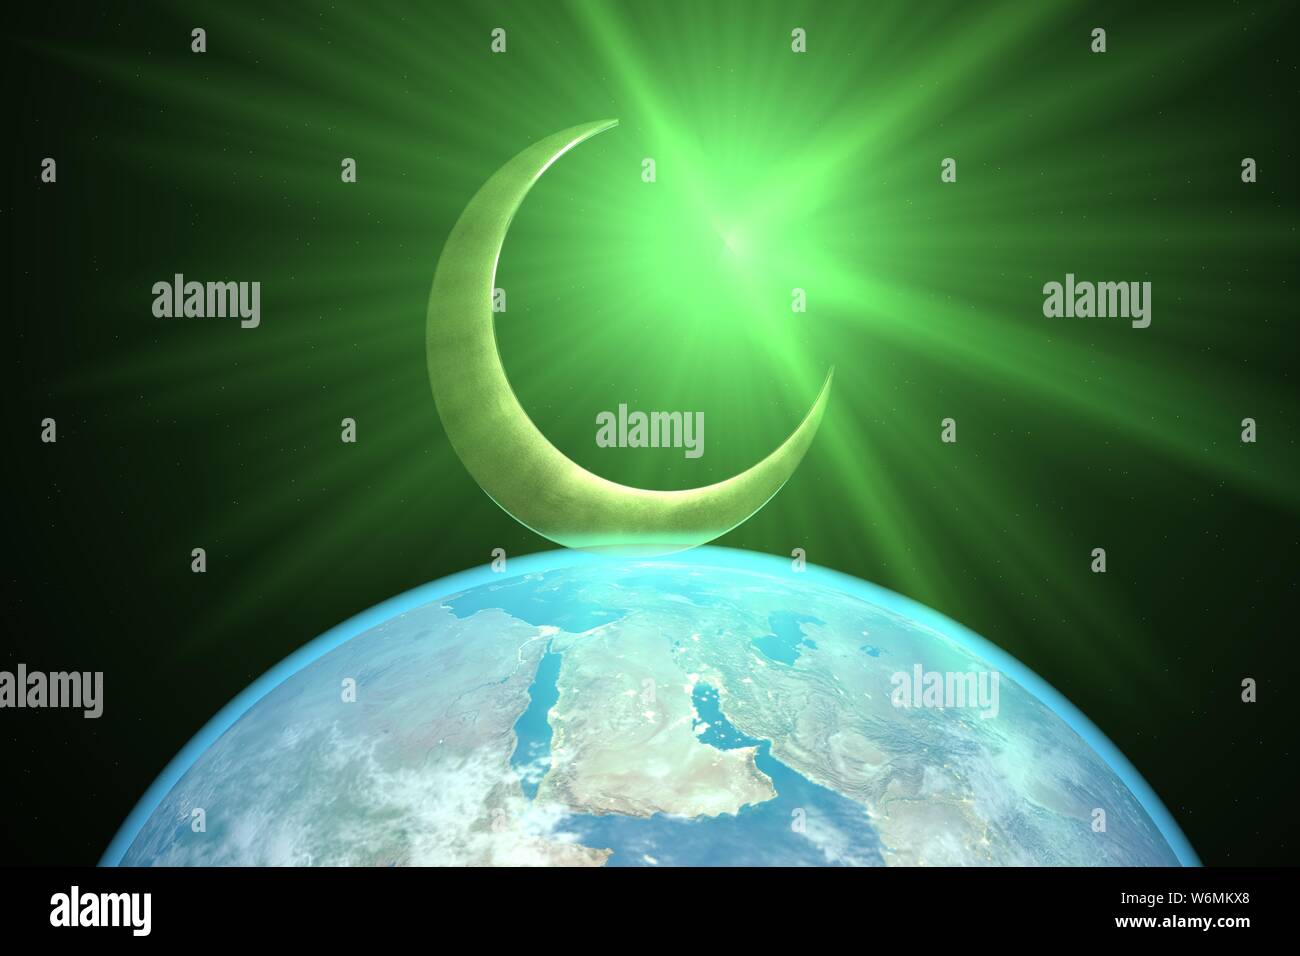 3d illustration: A young Golden Crescent moon over the planet earth and a star shed a blessed green light on the world of devout Muslims. Stock Photo